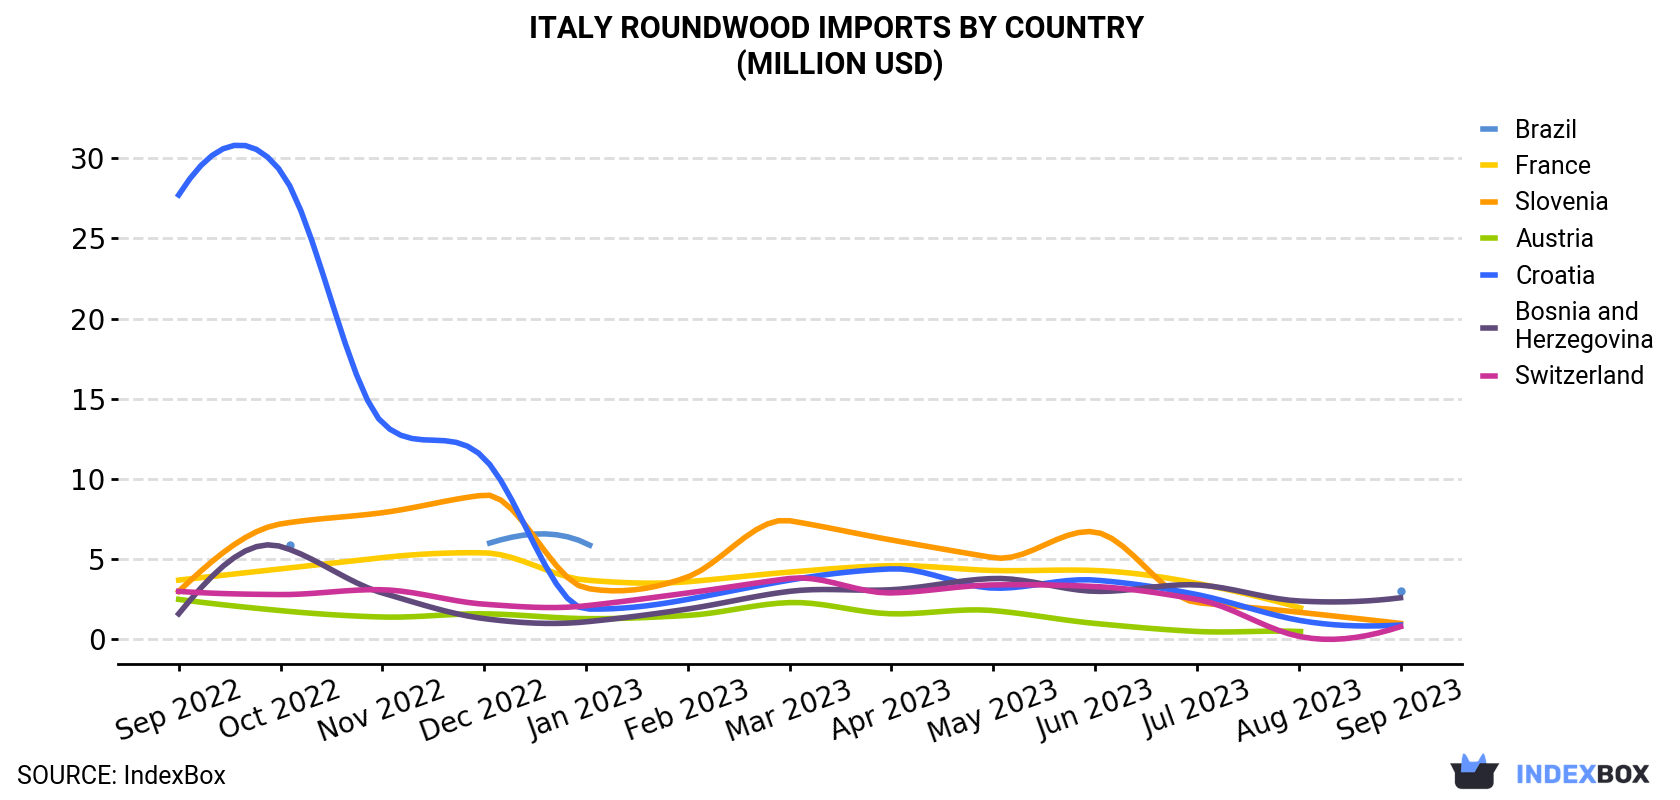 Italy Roundwood Imports By Country (Million USD)